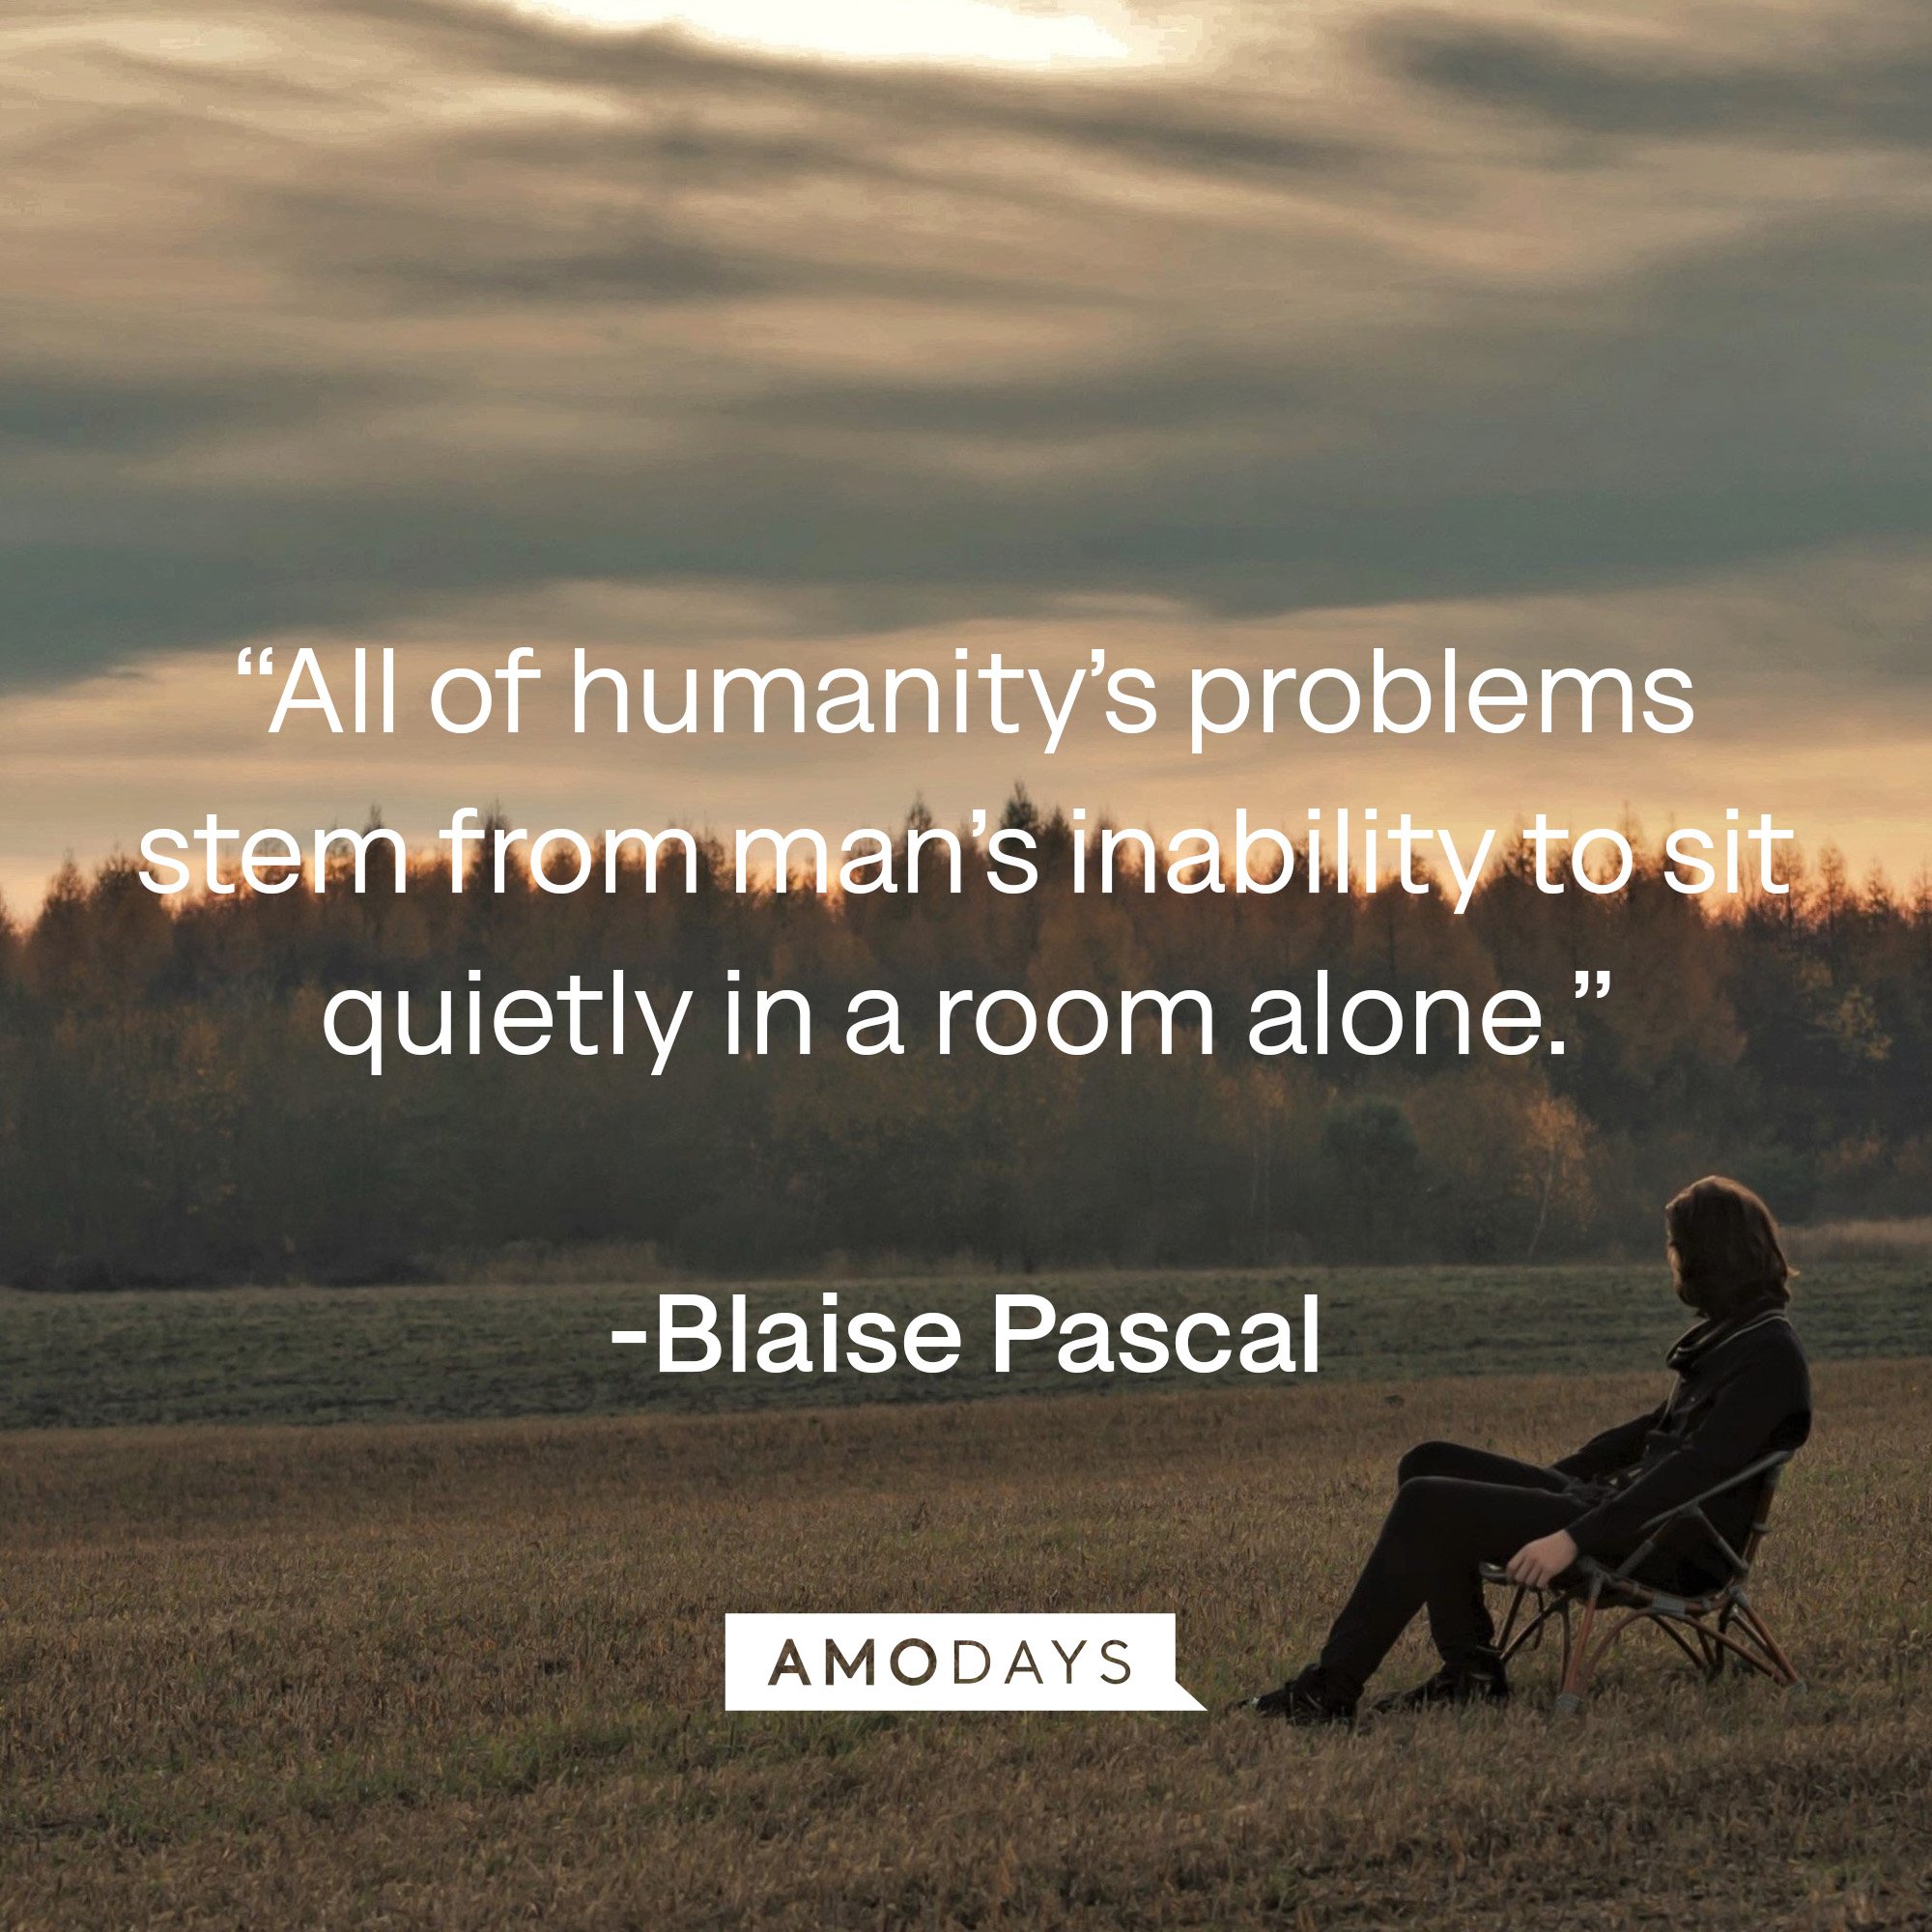 Blaise Pascal’s quote: “All of humanity’s problems stem from man’s inability to sit quietly in a room alone.” | Image: Amodays